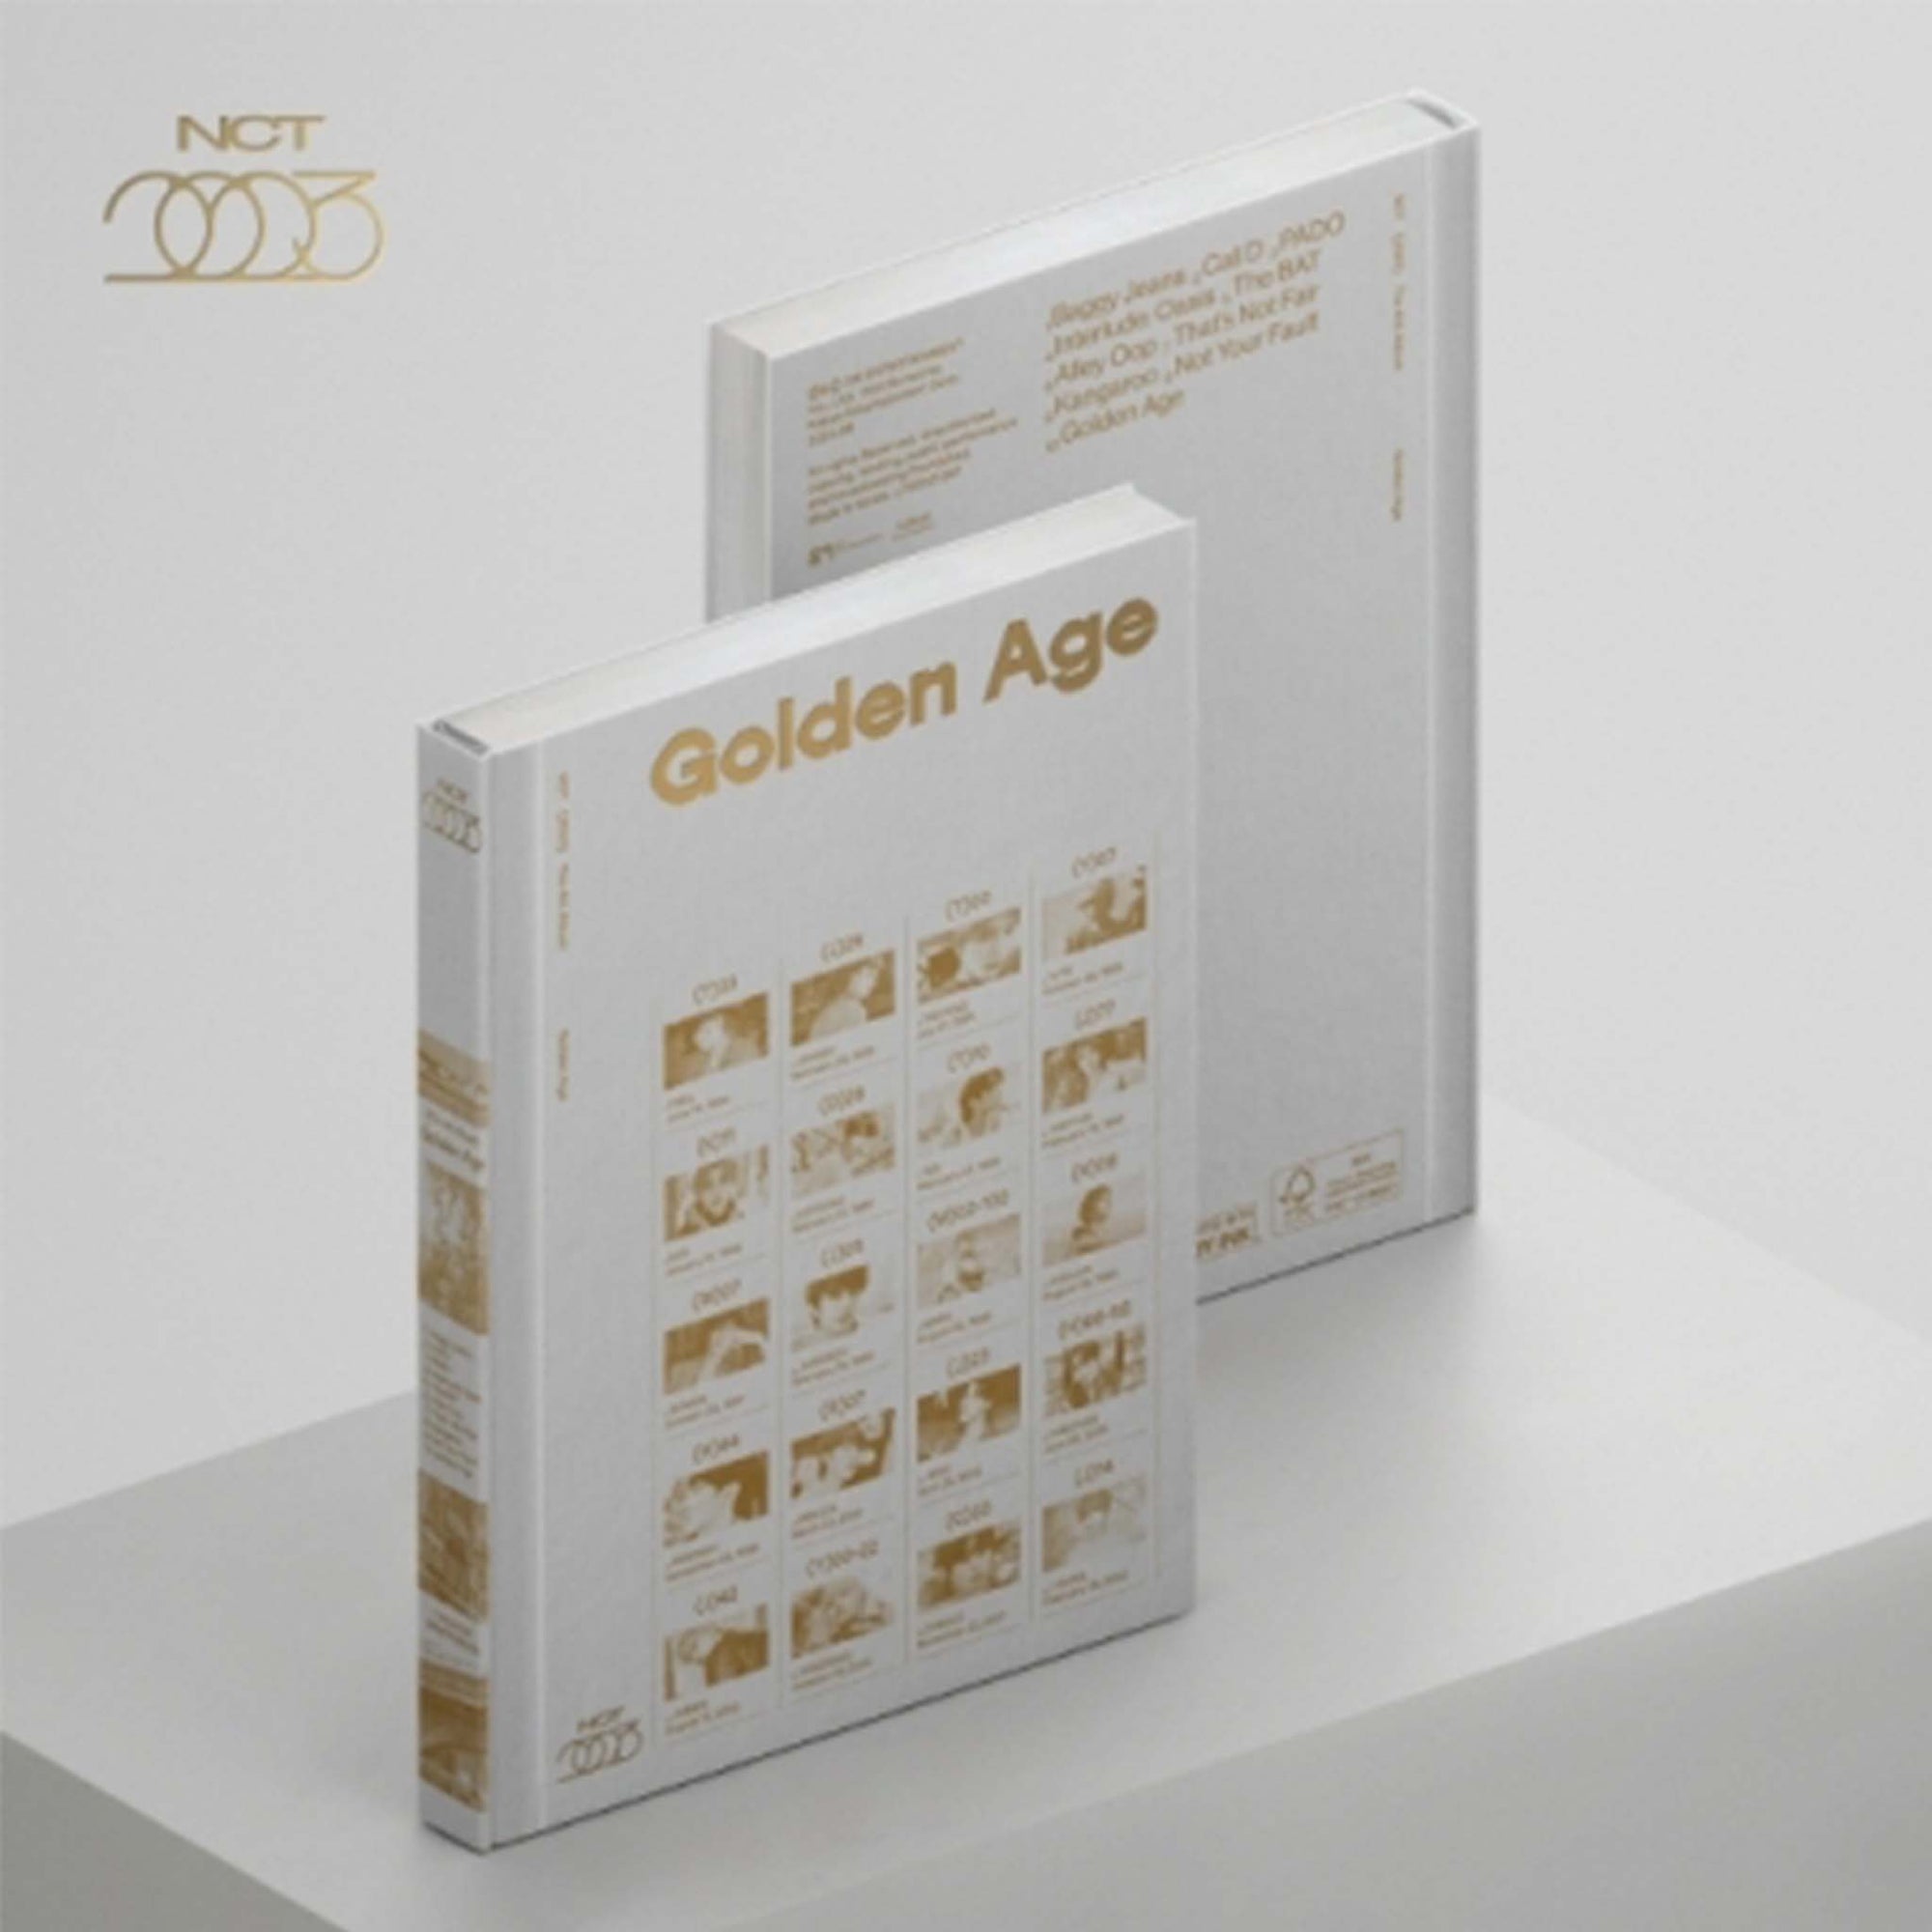 Golden Age [Archiving Ver.]